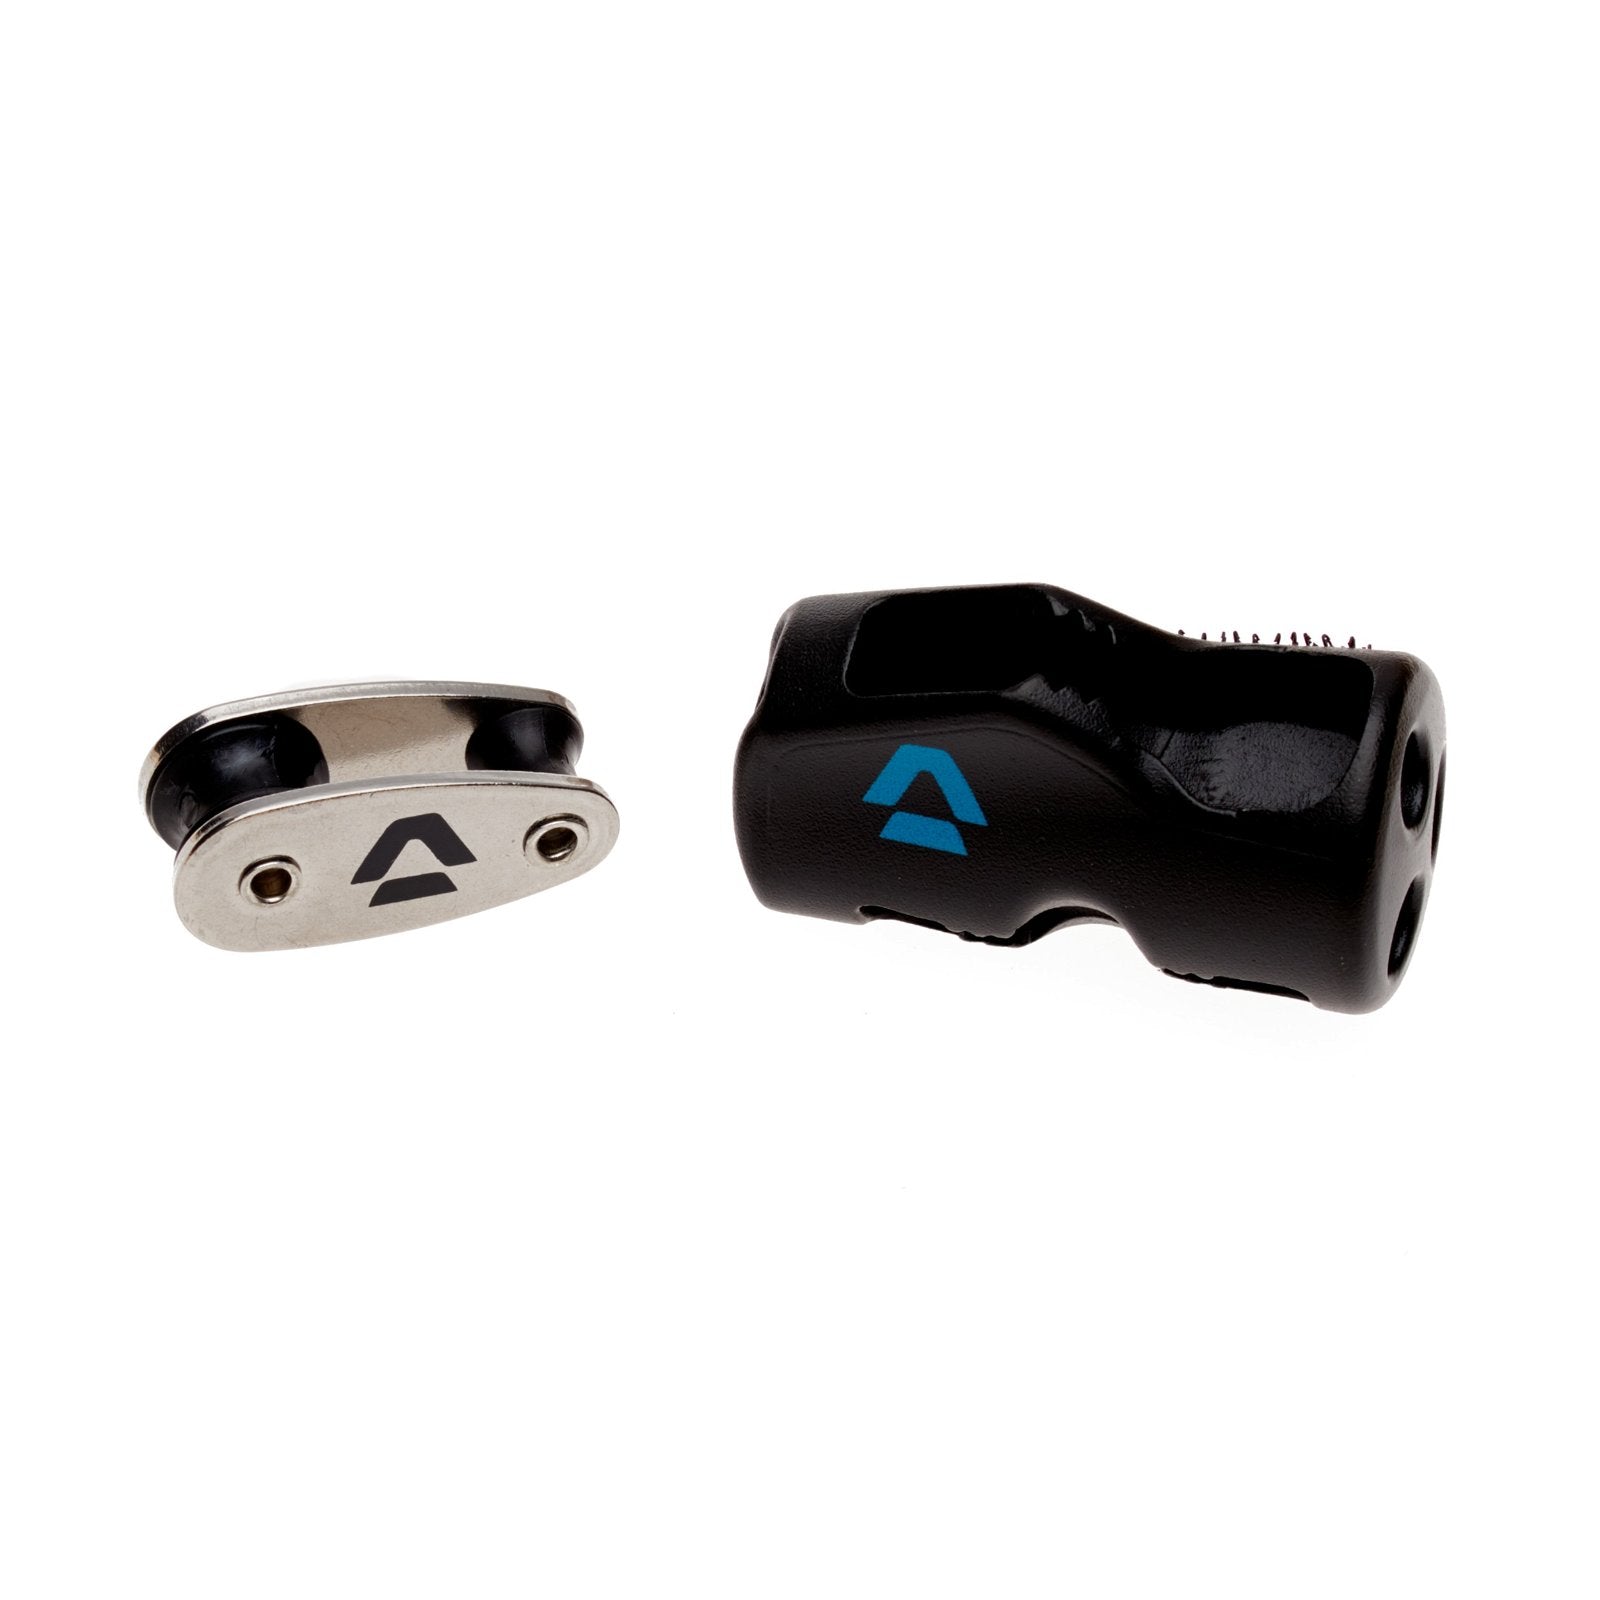 DUOTONE Vario Cleat & pulley (SS13-SS22) 2022-Duotone Kiteboarding-OneSize-Black-44900-8135-9008415854370-Surf-store.com